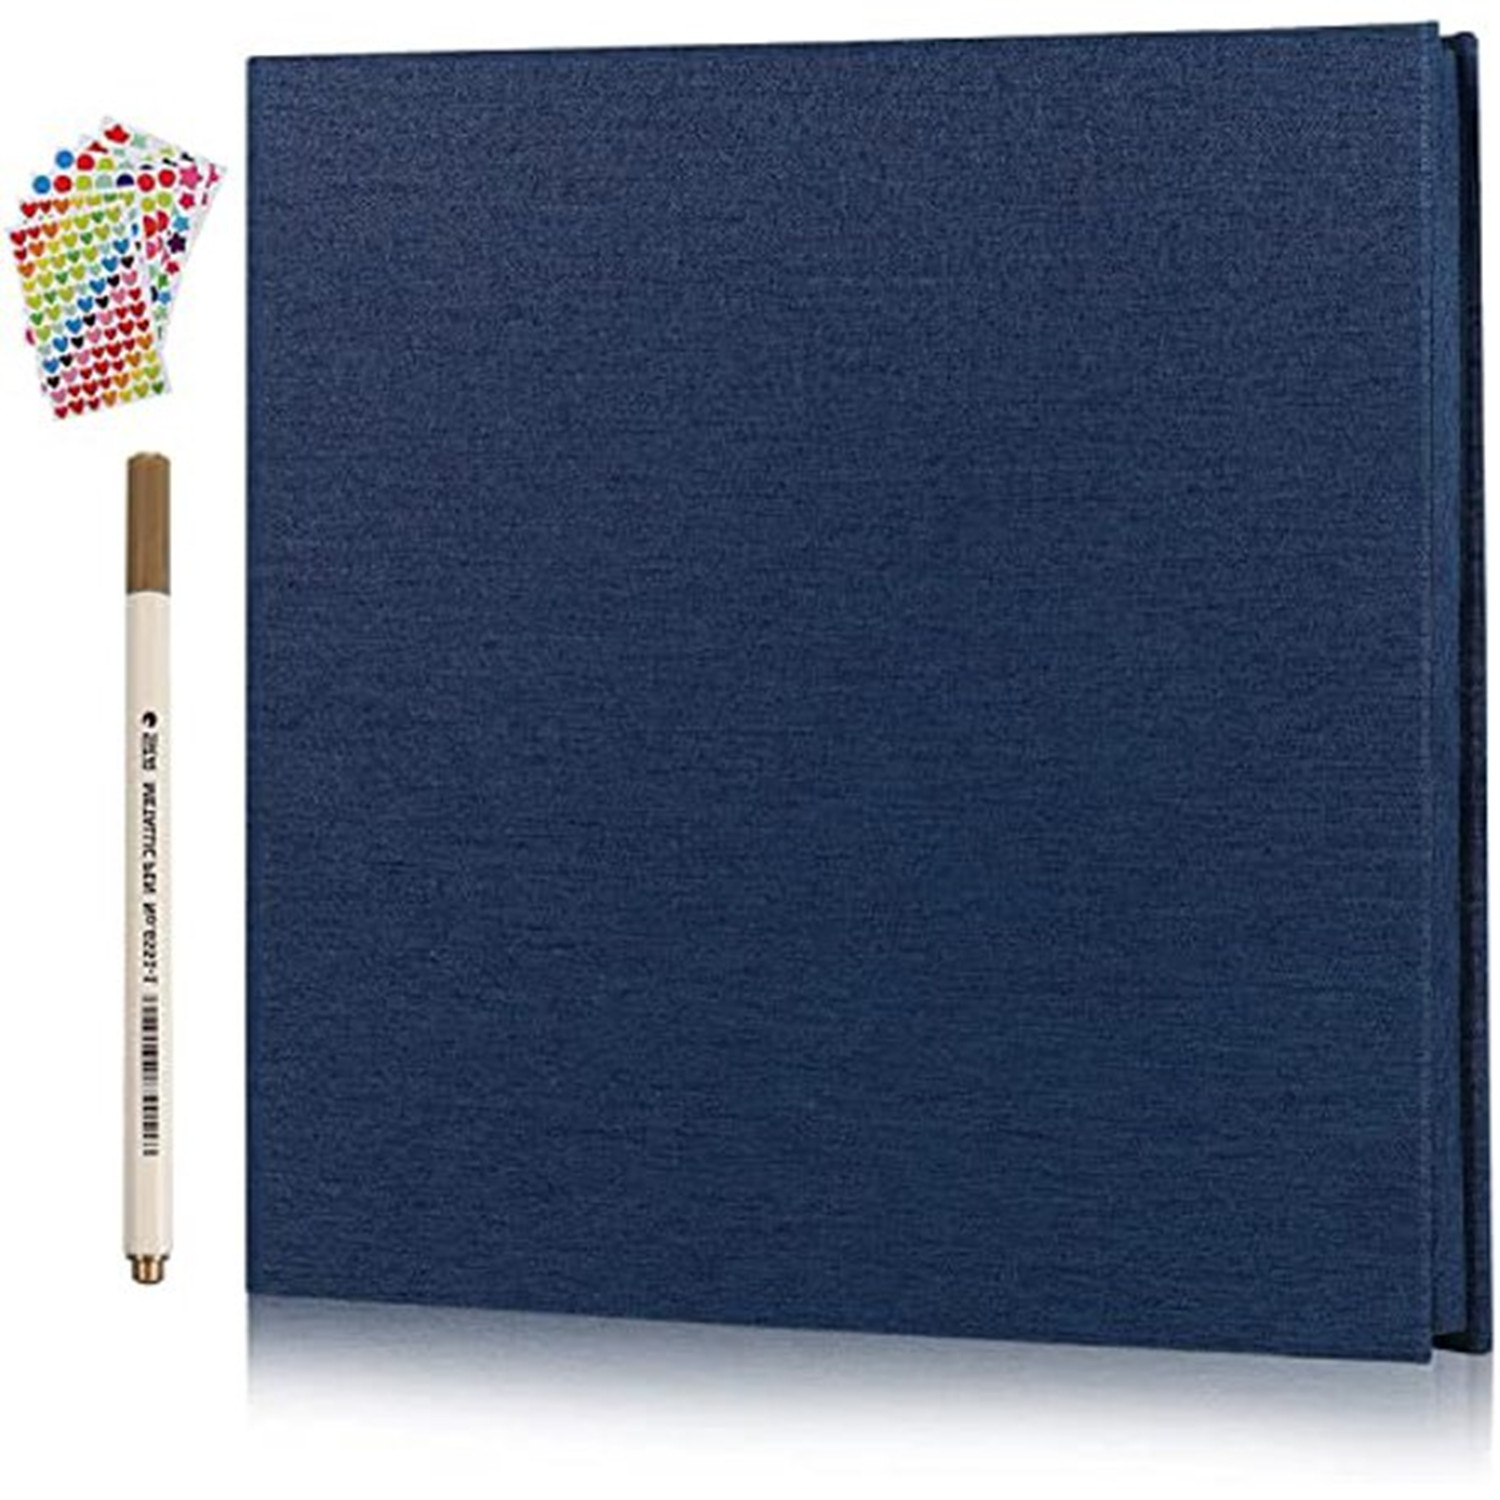 RECUTMS Self Adhesive Scrapbook ,Blue Double Sided Photo Album 40 Pages  Hold 200 6x4 Photos 